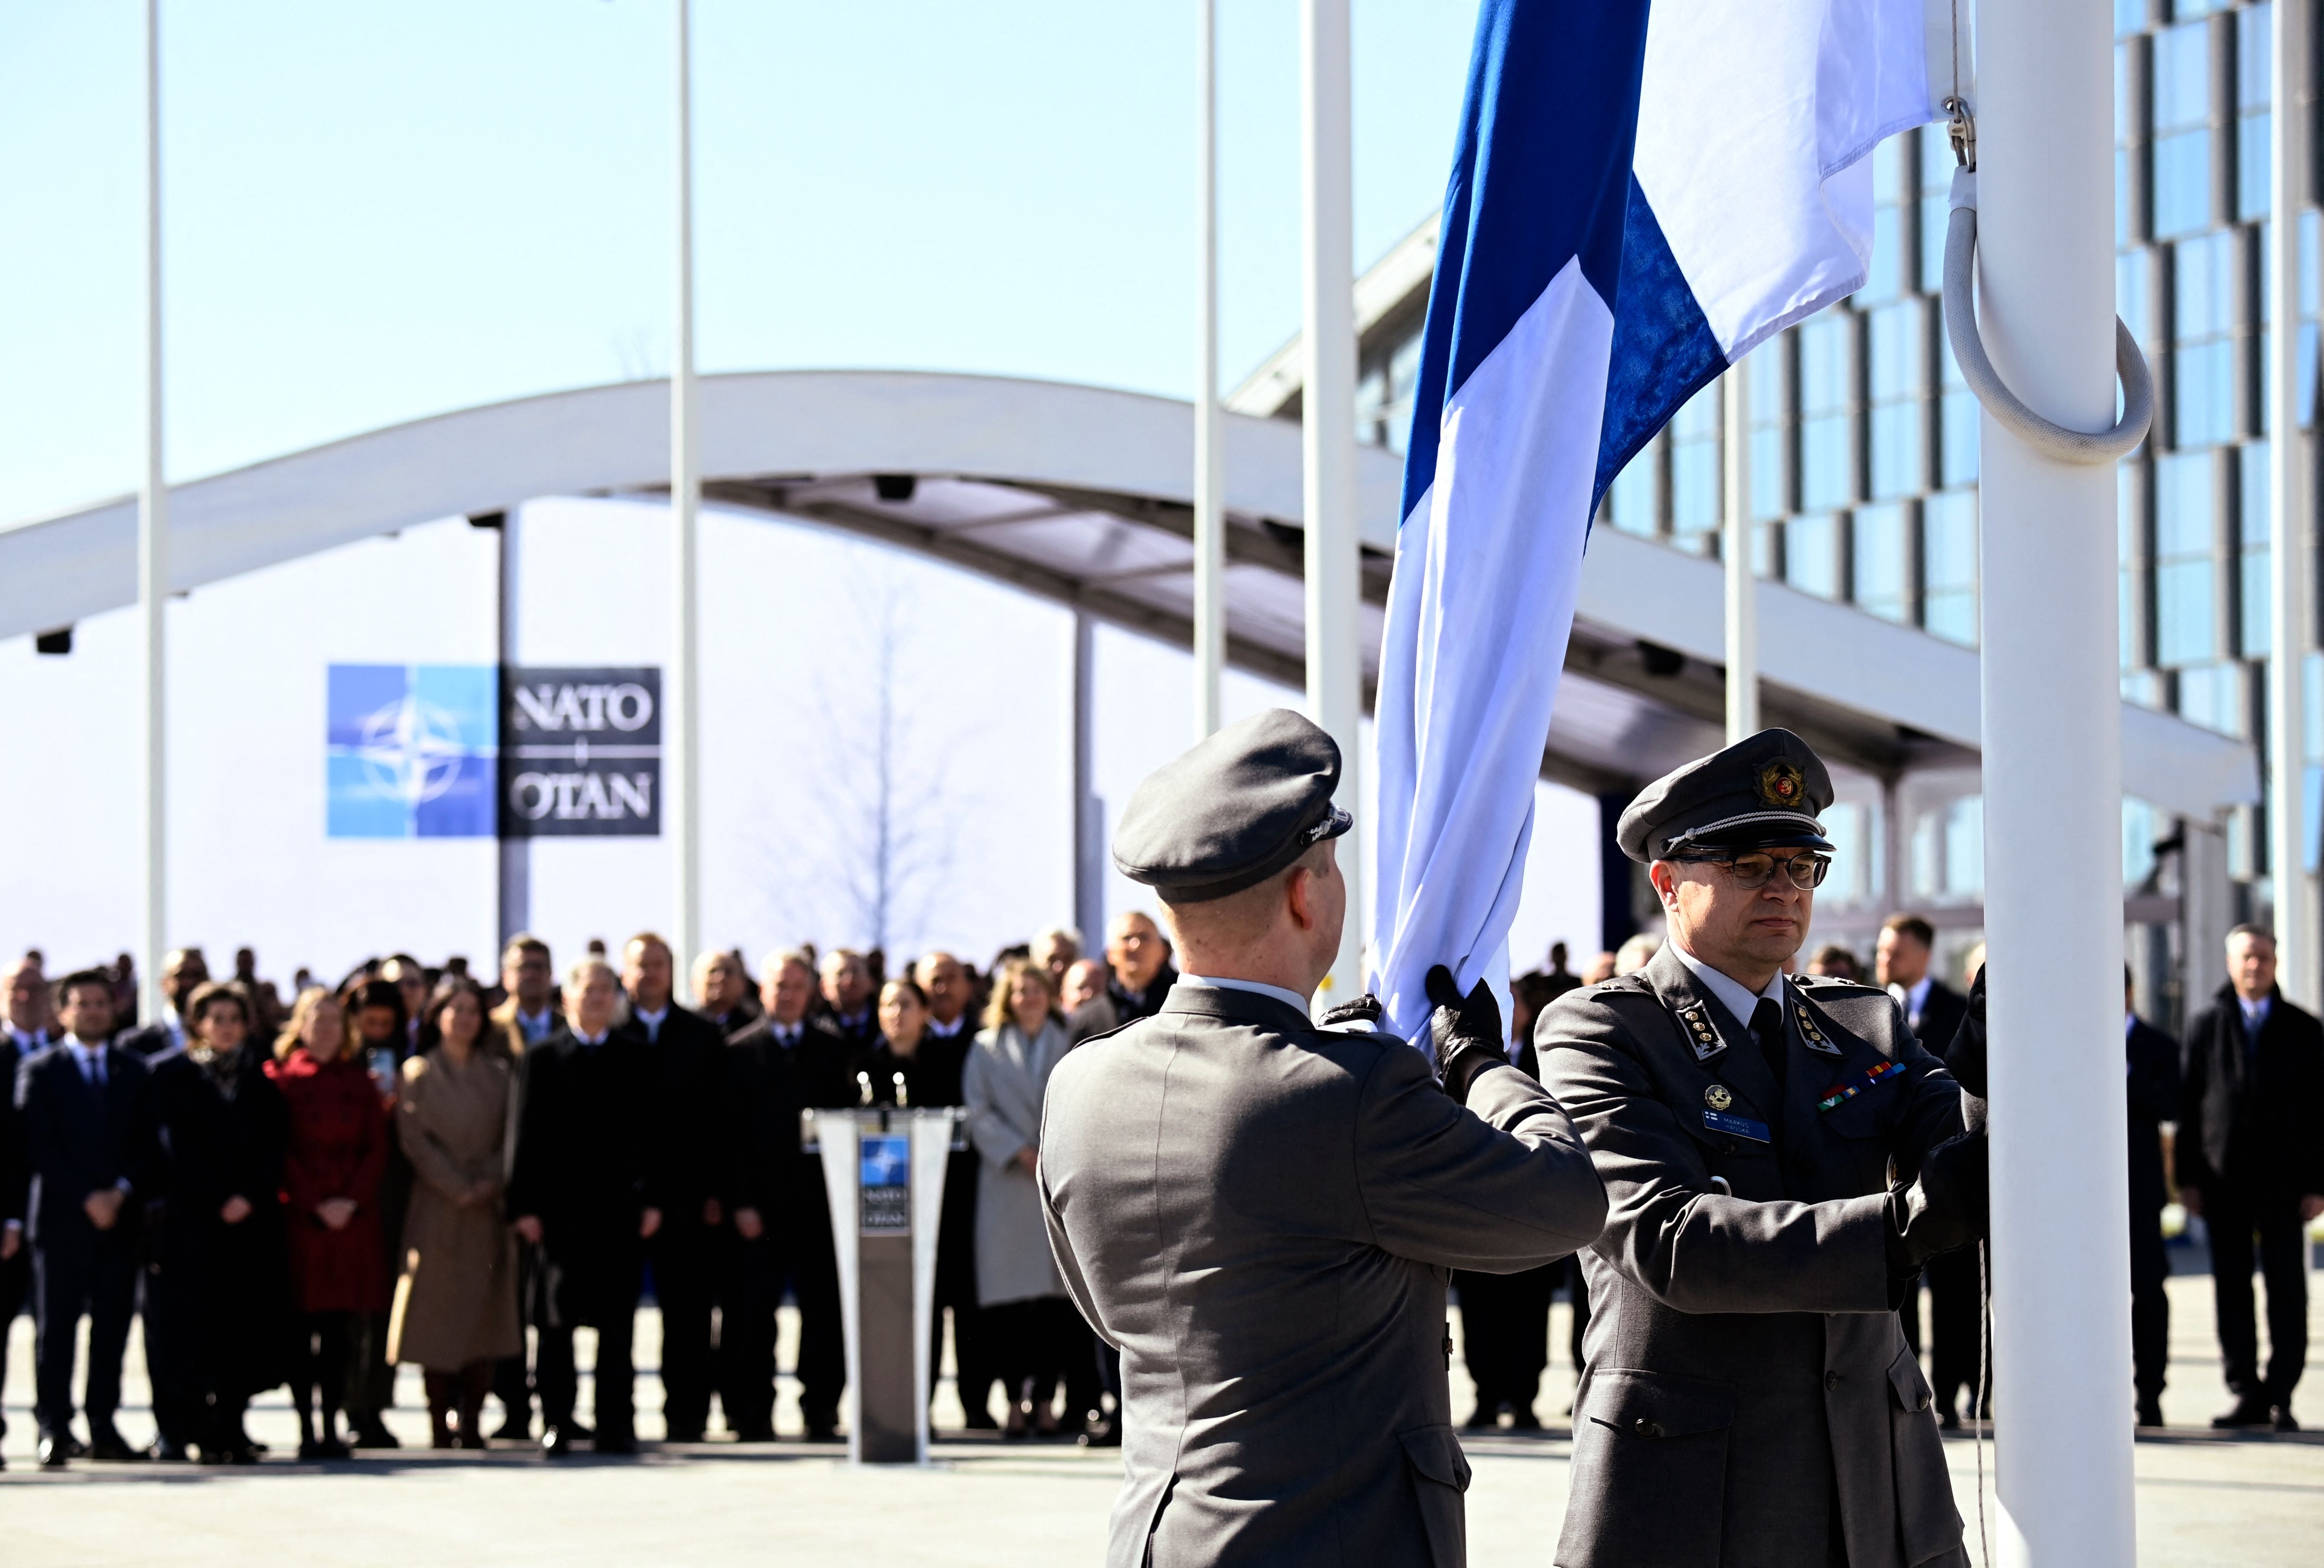 Finnish military personnel install the Finnish national flag at Nato HQ in Brussels